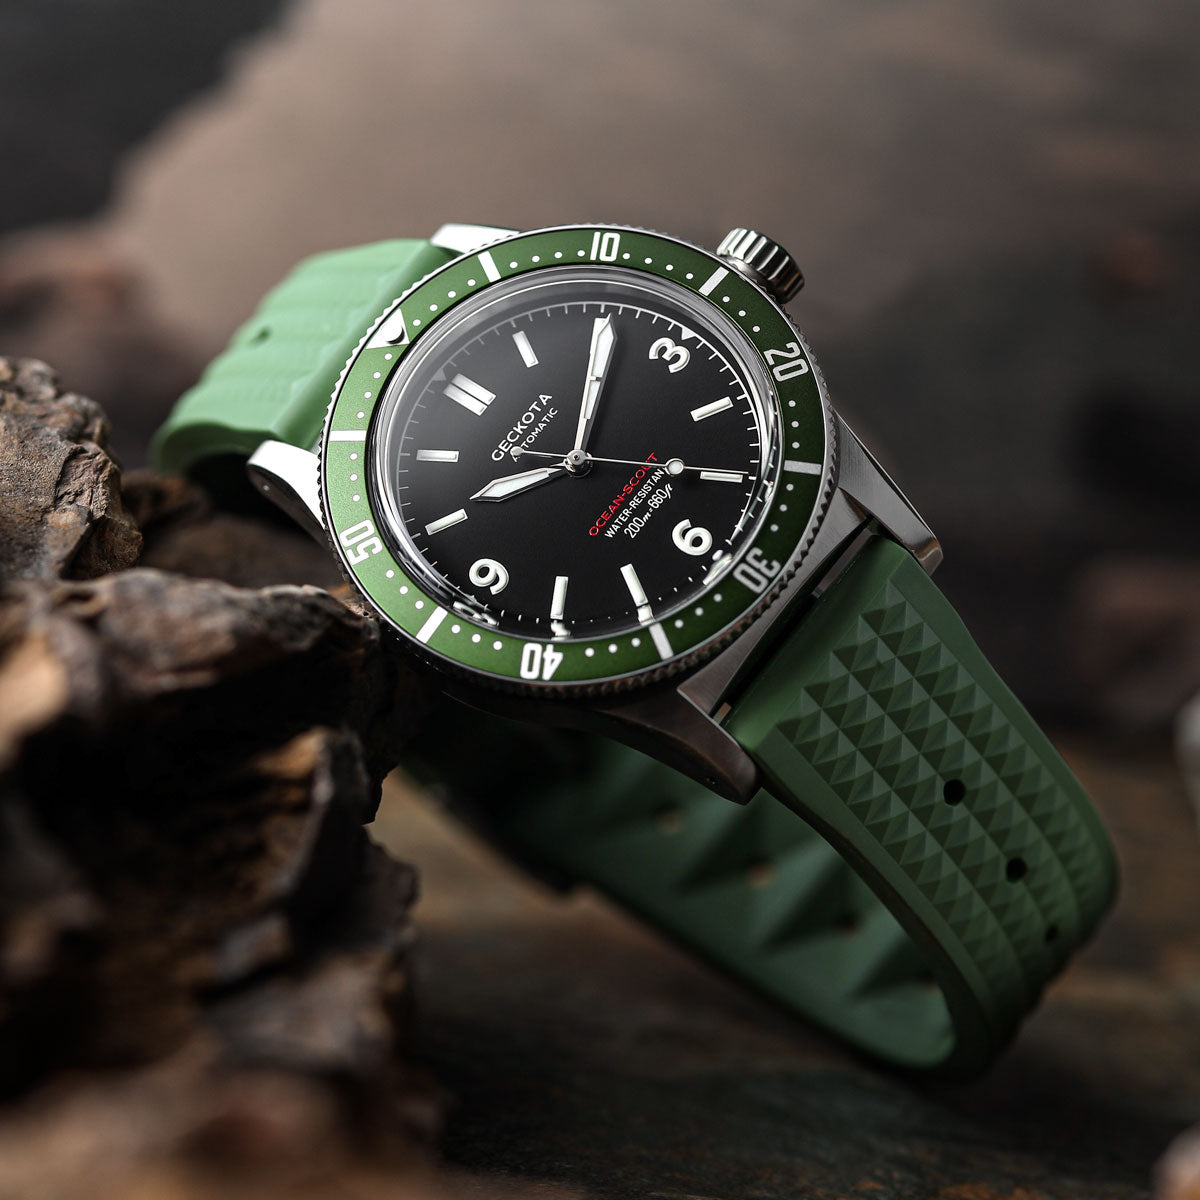 Seacroft Waffle FKM Rubber Dive Watch Strap - Green - additional image 1